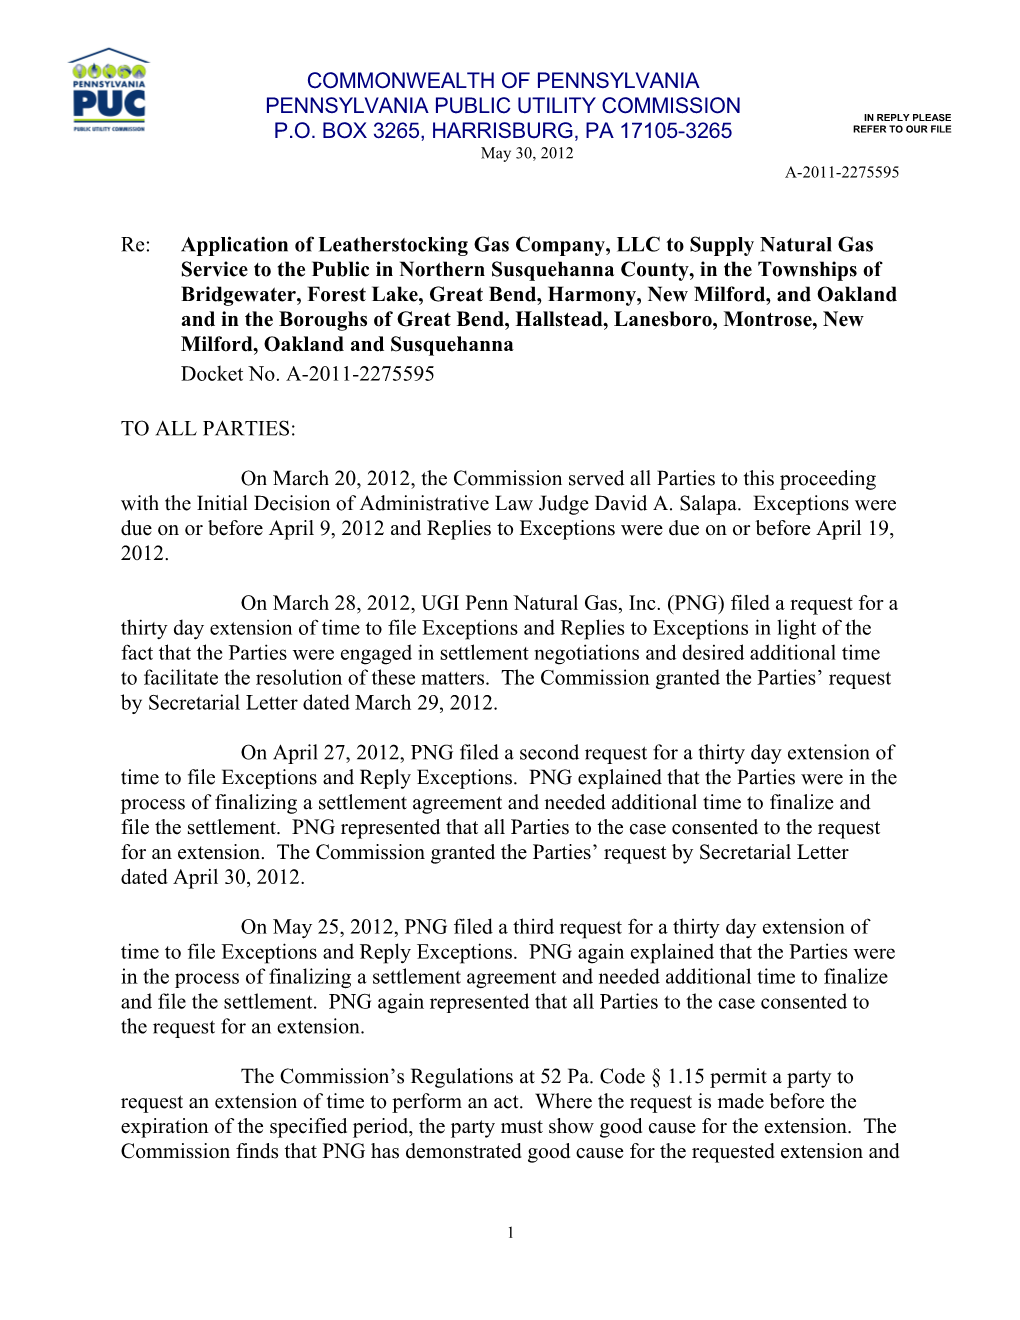 Re: Application of Leatherstocking Gas Company, LLC to Supply Natural Gas Service to The